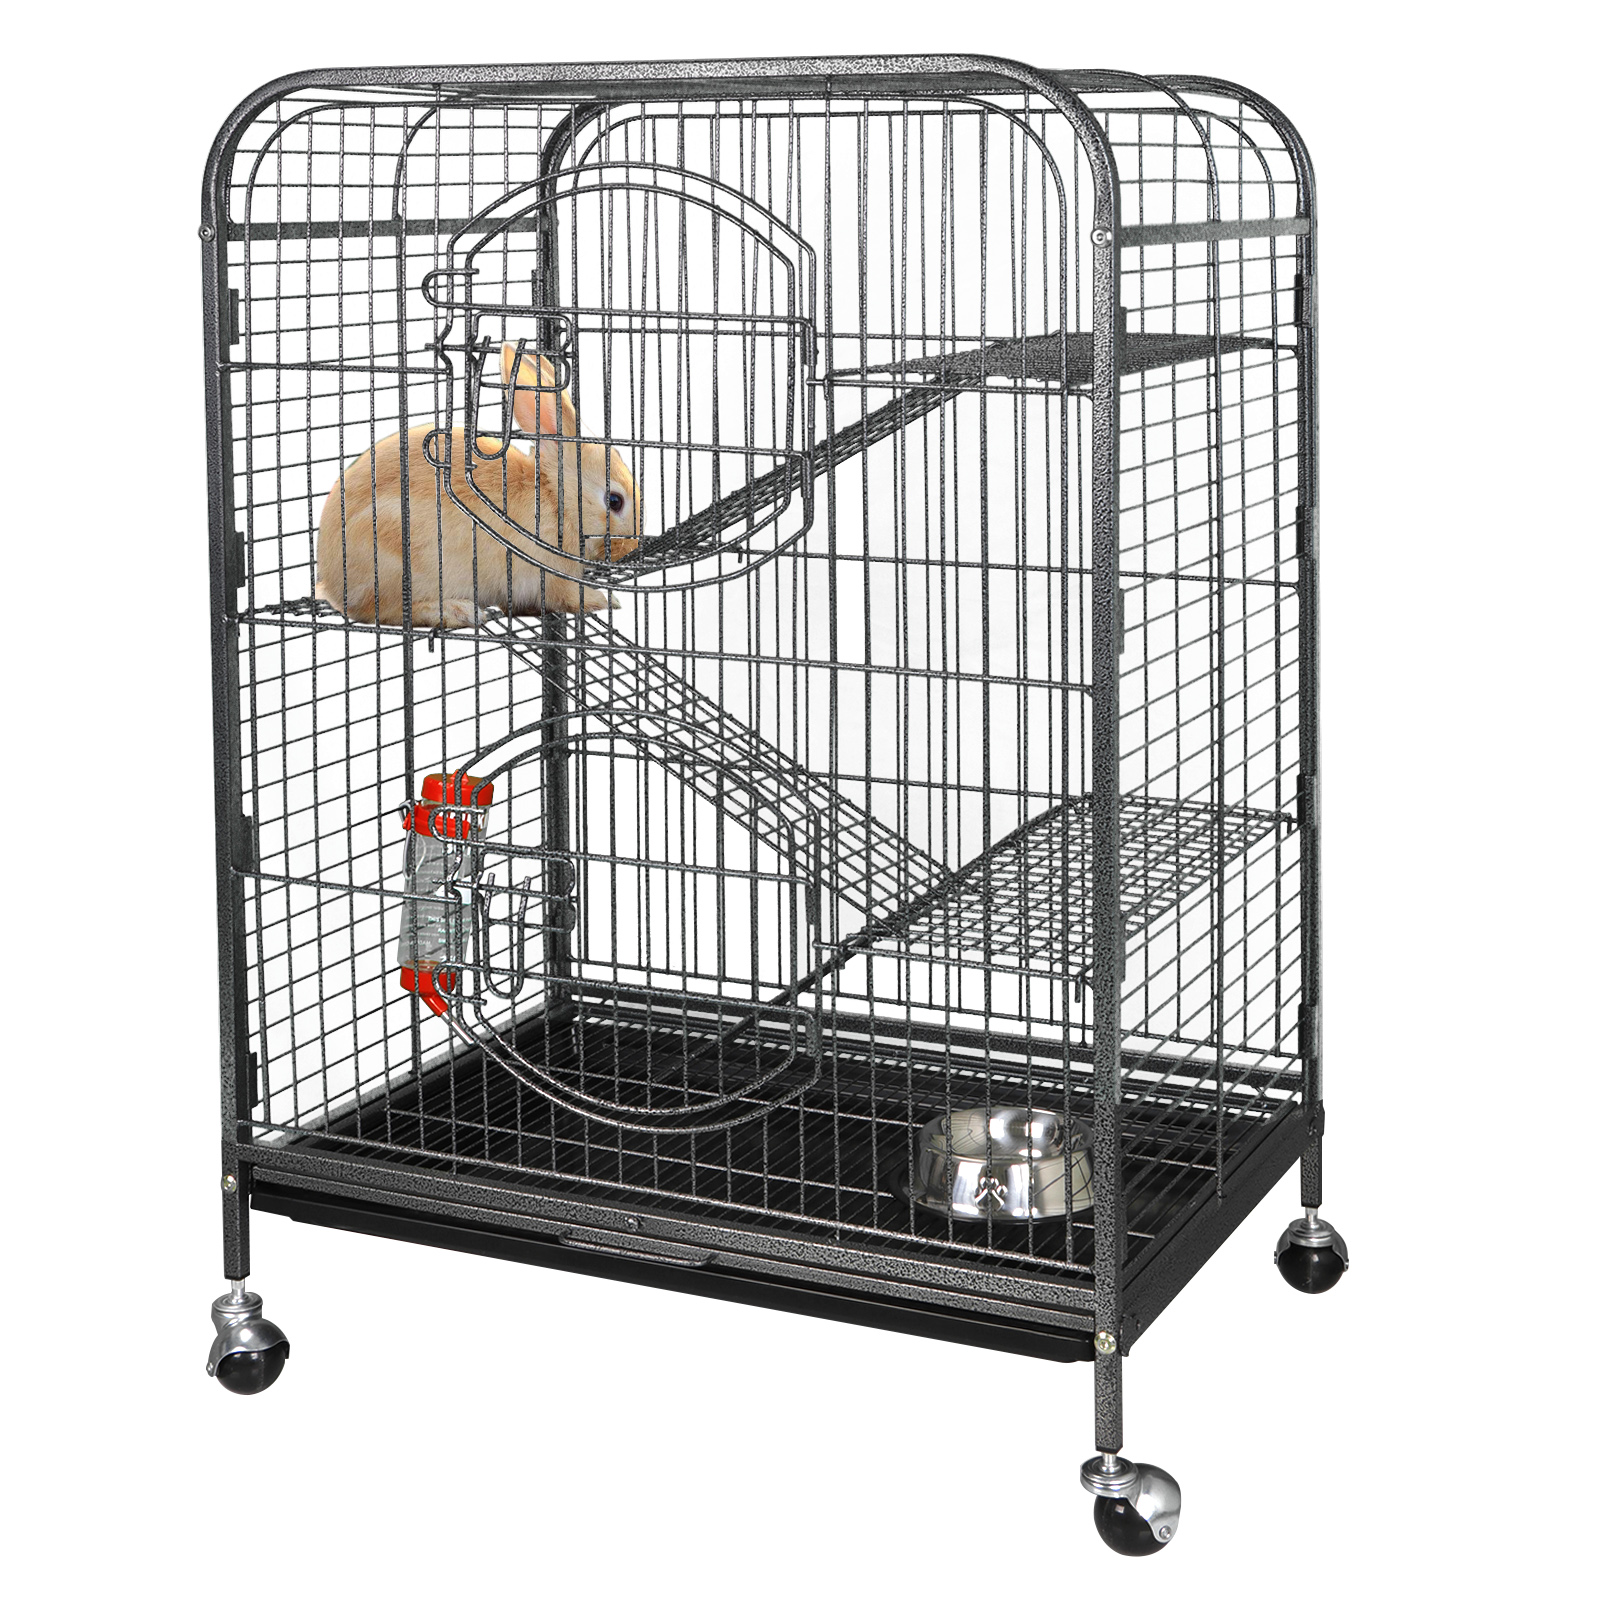 ZENY 37'' Small Animal Cage with 4 Tiers, 3 Ladders and 2 Front Doors Metal Frame - image 1 of 12